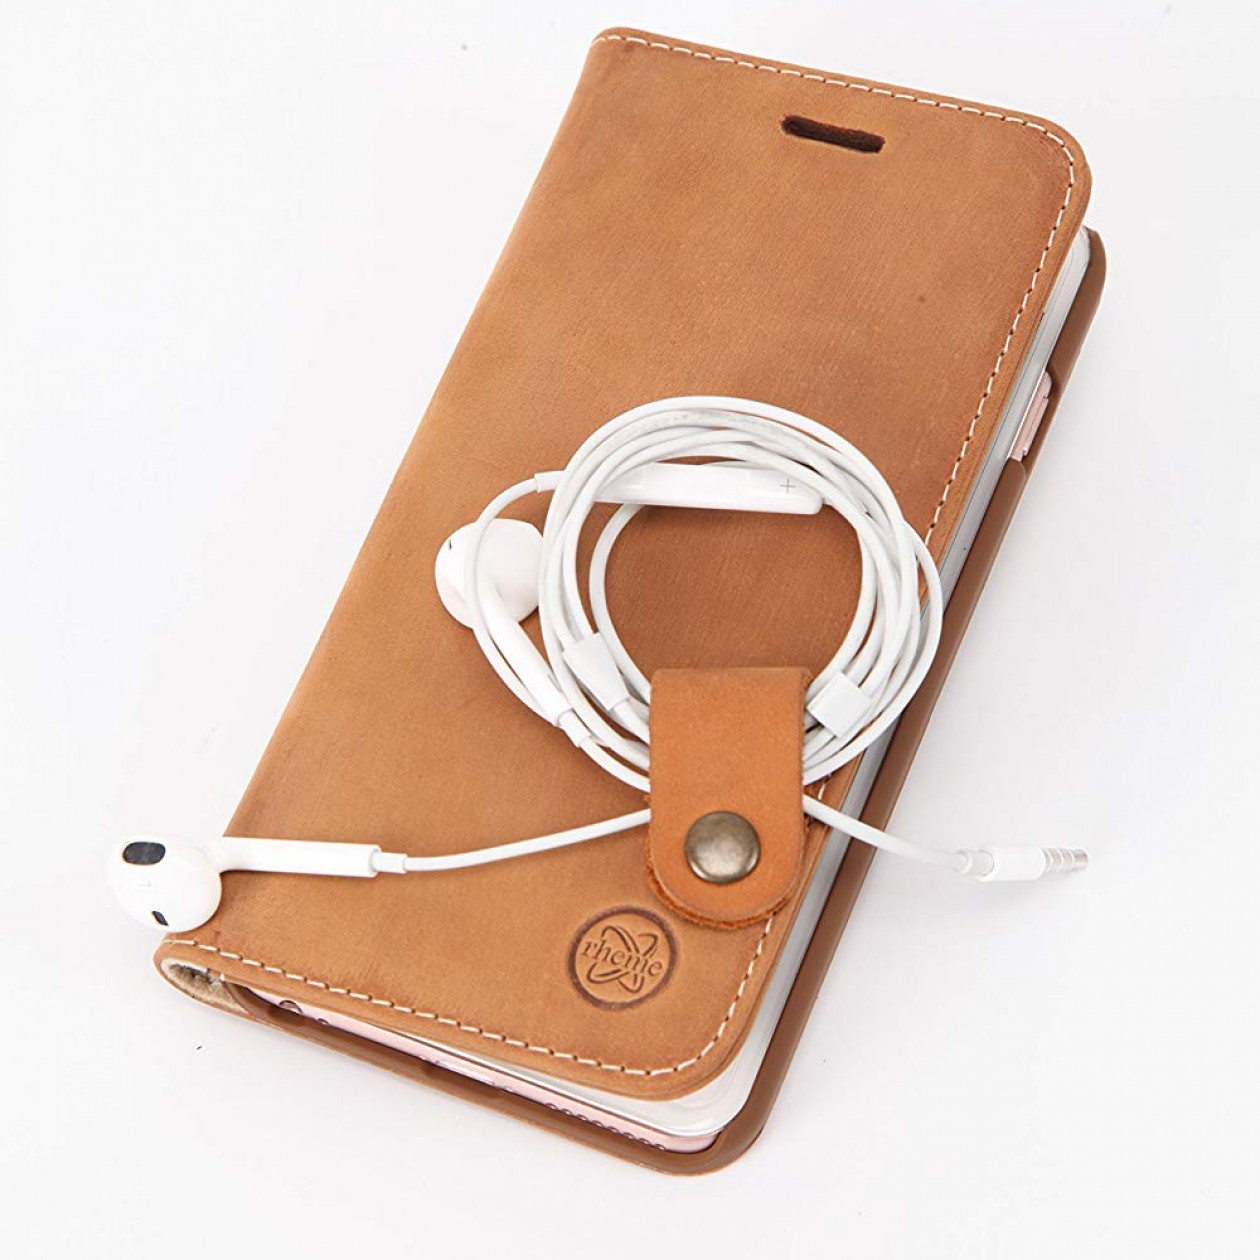 Genuine Leather iPhone Brown Cover with Card Slot for 5.5 inch iPhone 6/6S